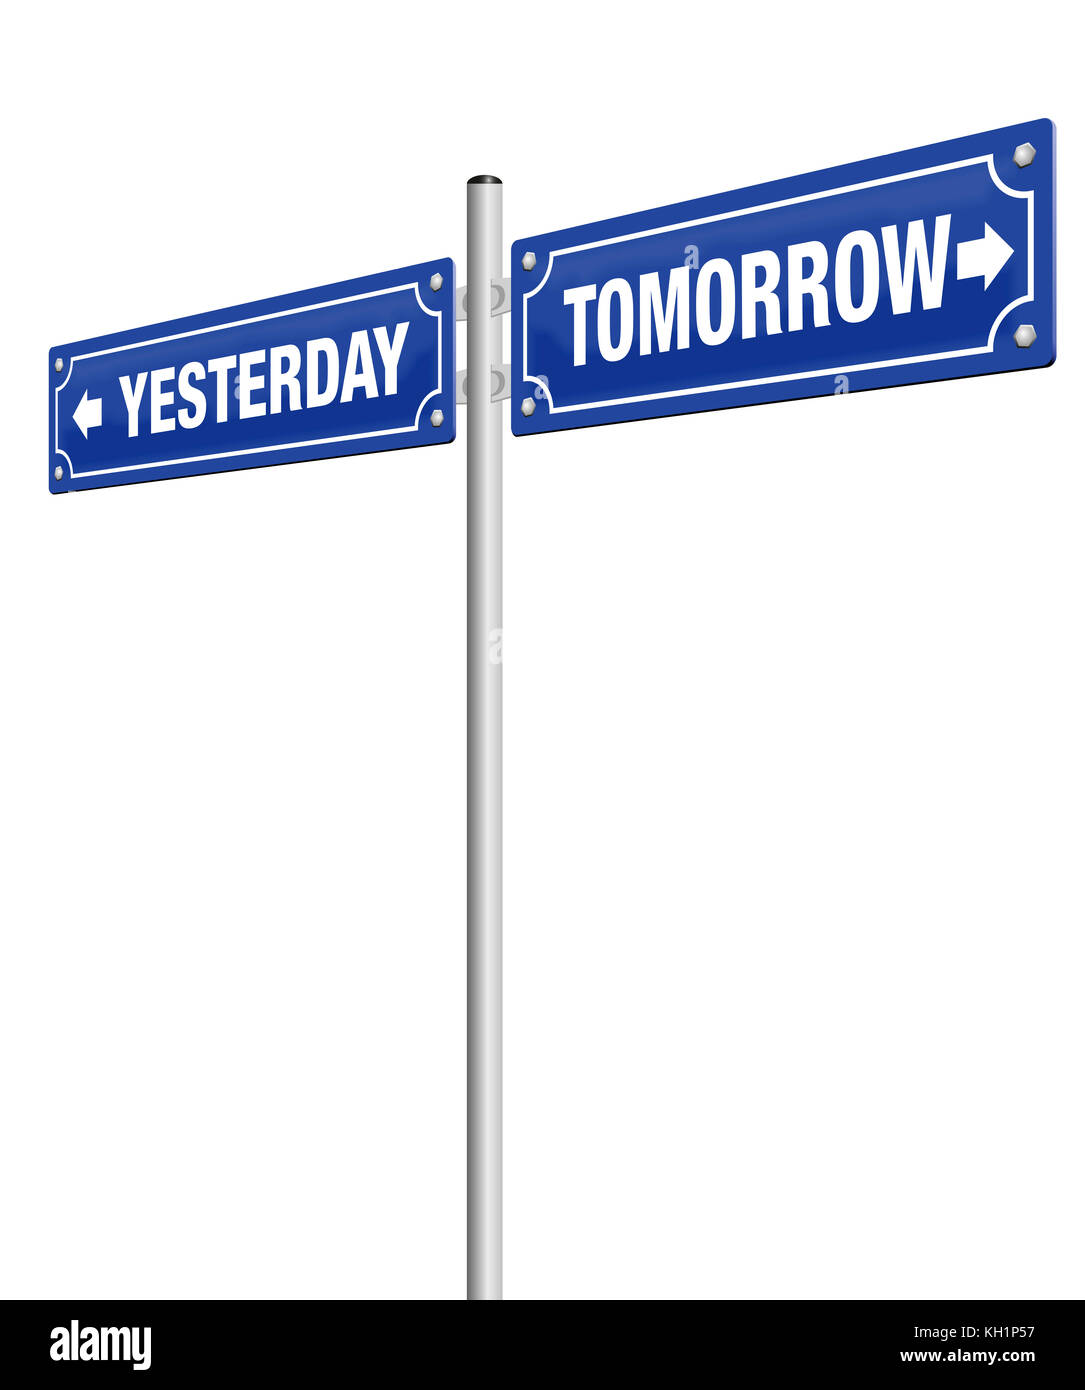 YESTERDAY and TOMORROW, written on two road signs in opposite direction - symbolic for past and future, for finished and coming, for aged and modern. Stock Photo